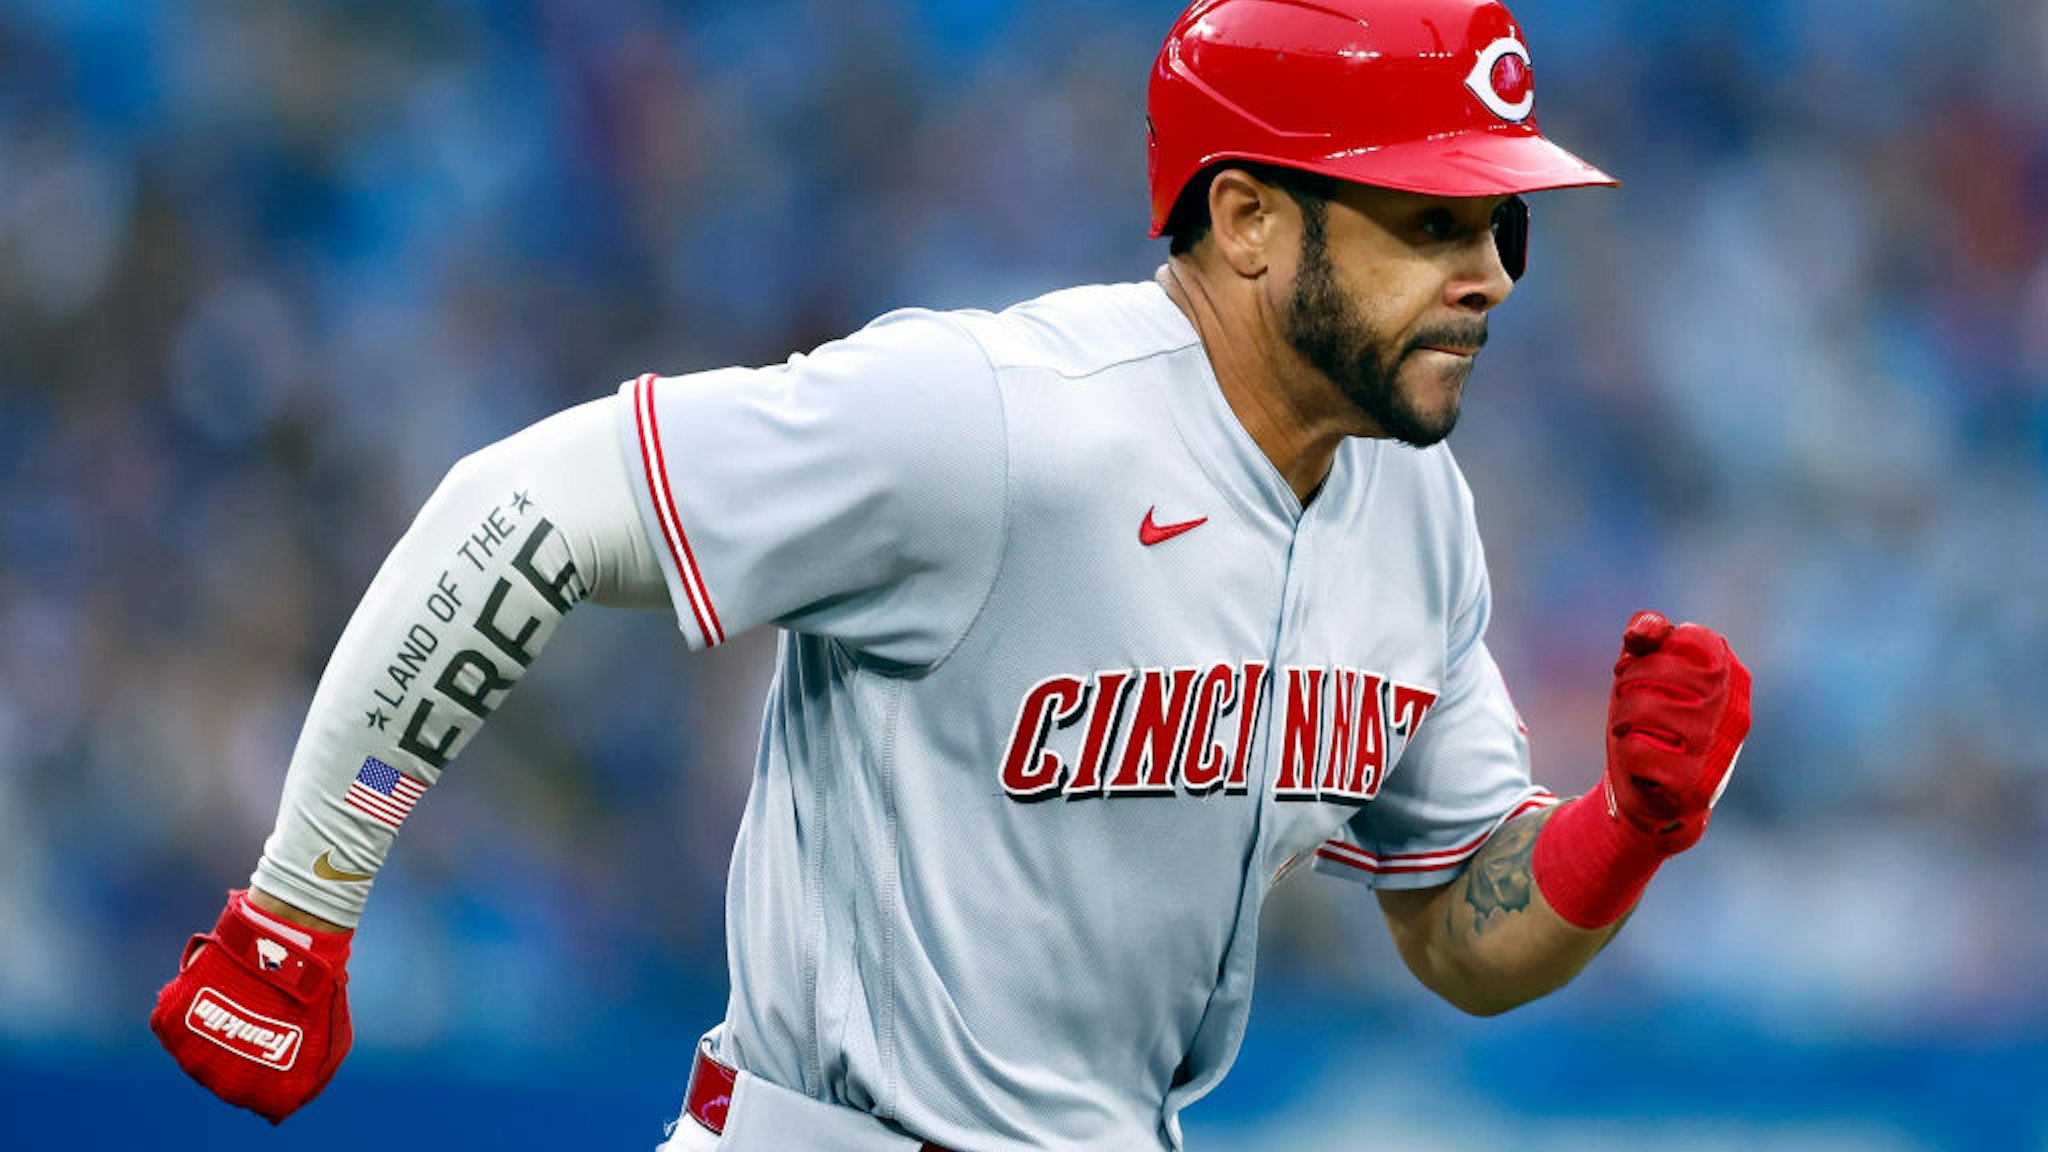 Reds outfielder Tommy Pham slapped Giants player Joe Pederson over a dispute from their fantasy football league